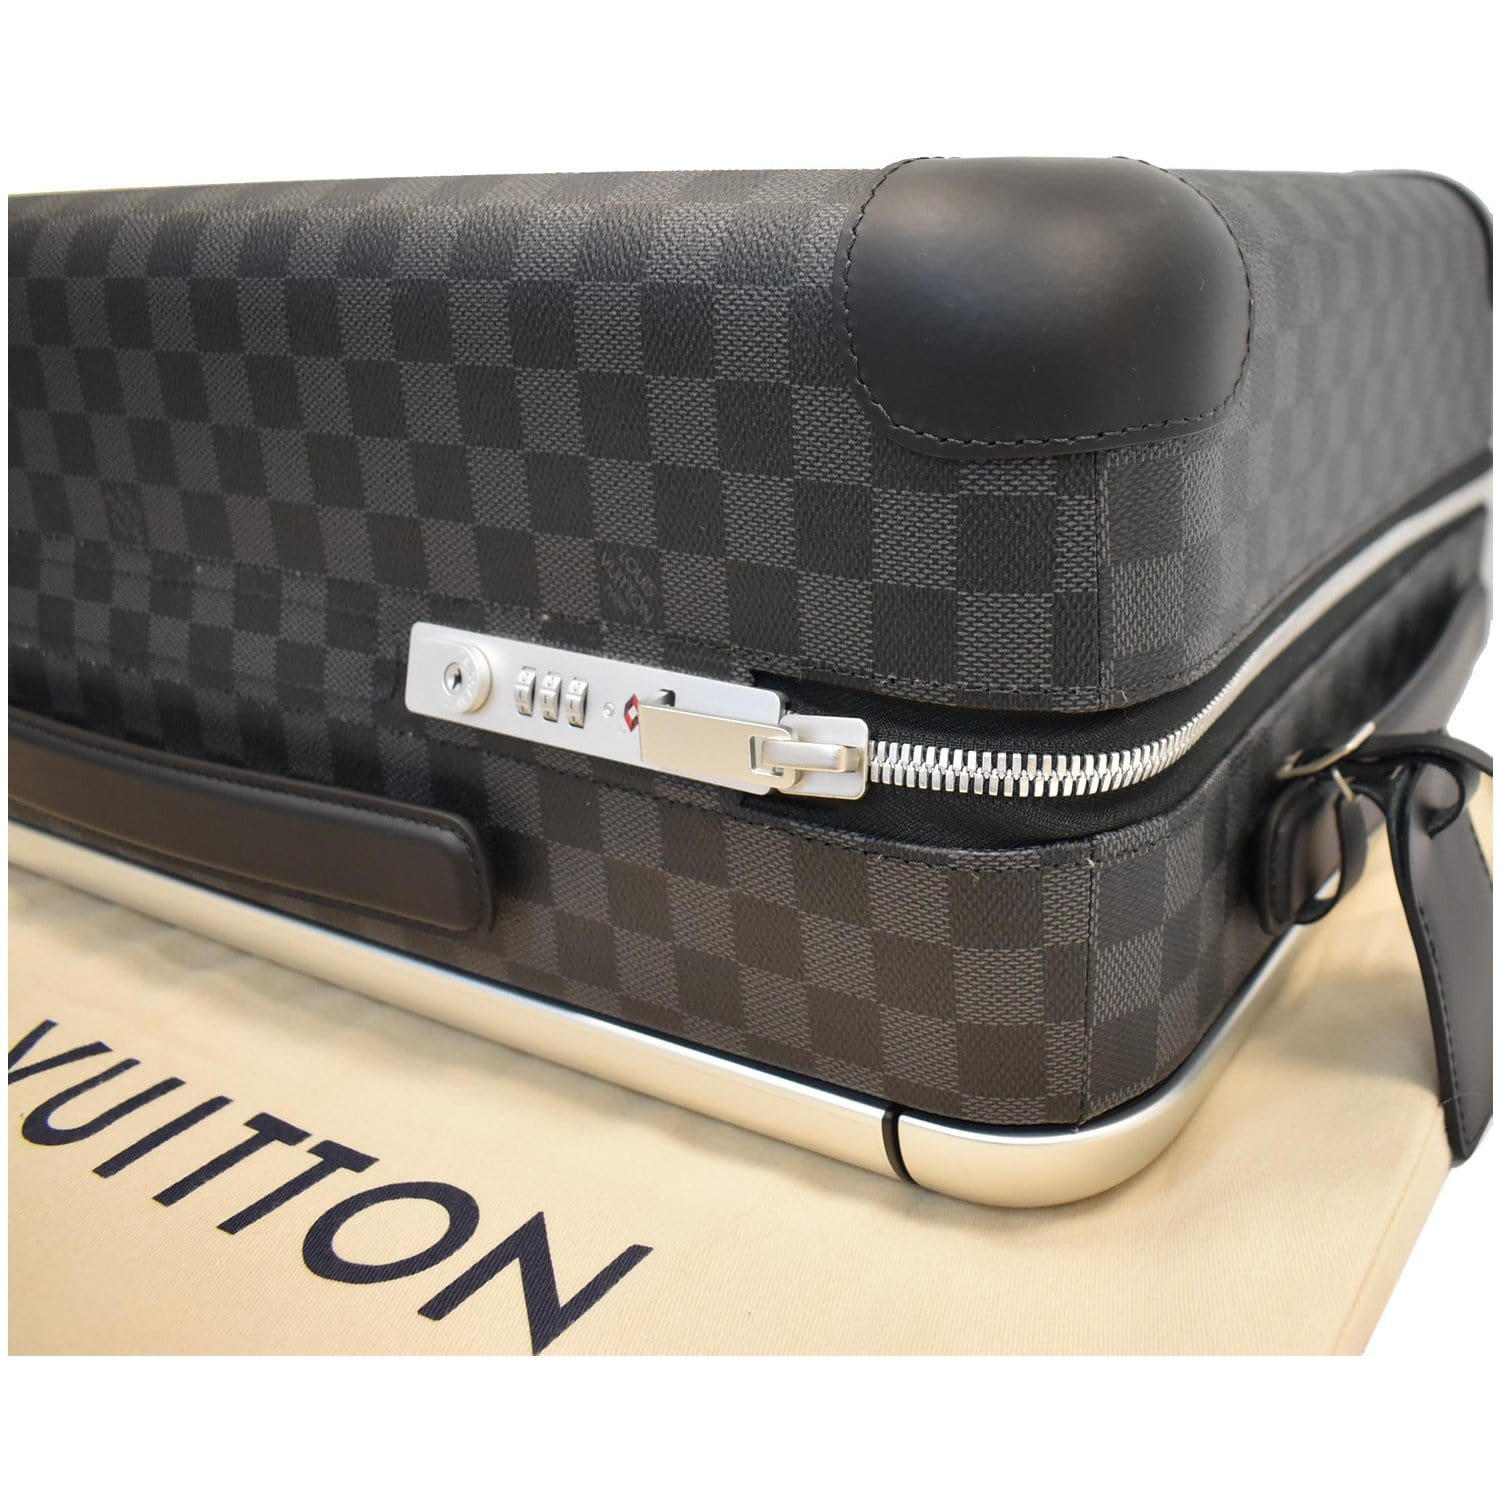 LOUIS VUITTON SUITCASE 5 YEAR REVIEW: HORIZON 55 ROLLING LUGGAGE